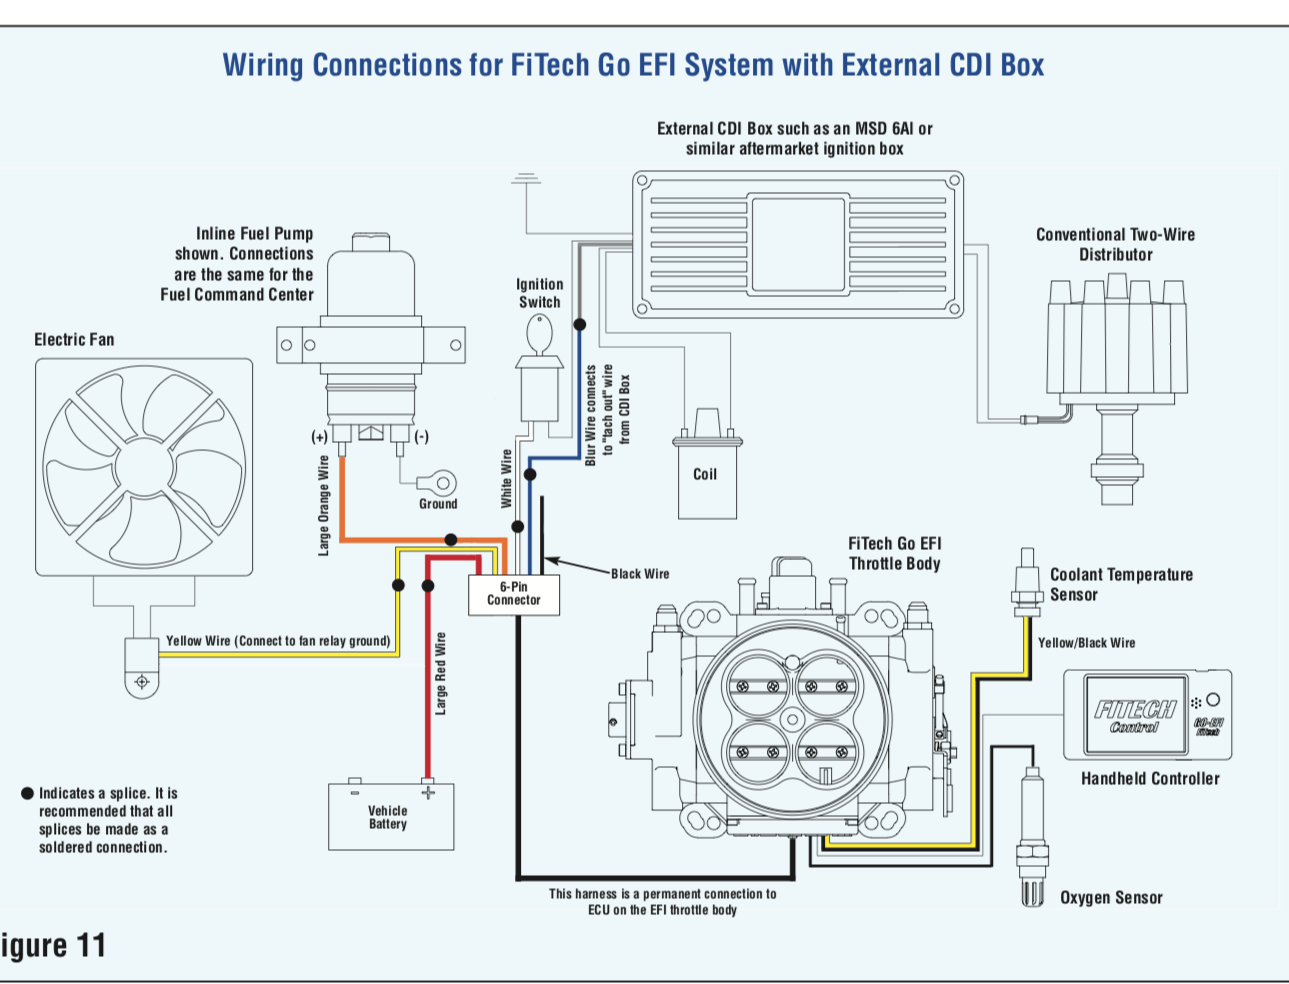 Fitech Wiring W/cdi Box And Petronix Distributor - Vintage Mustang - Fitech Wiring Diagram